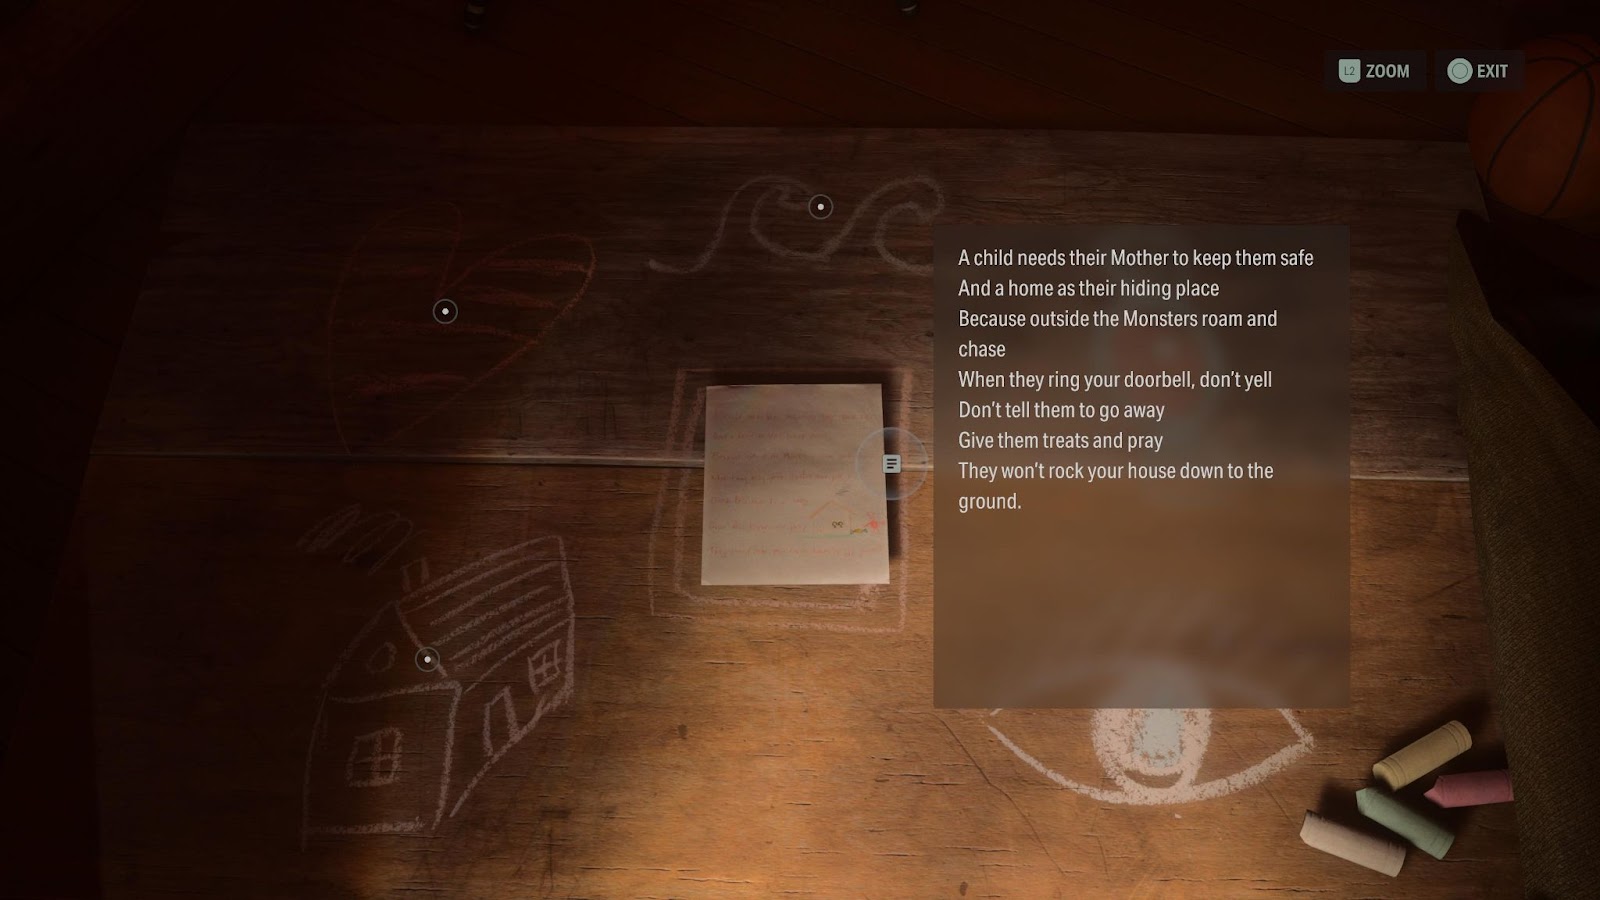 An in game screenshot of the ranger station nursery rhyme from Alan Wake 2. 